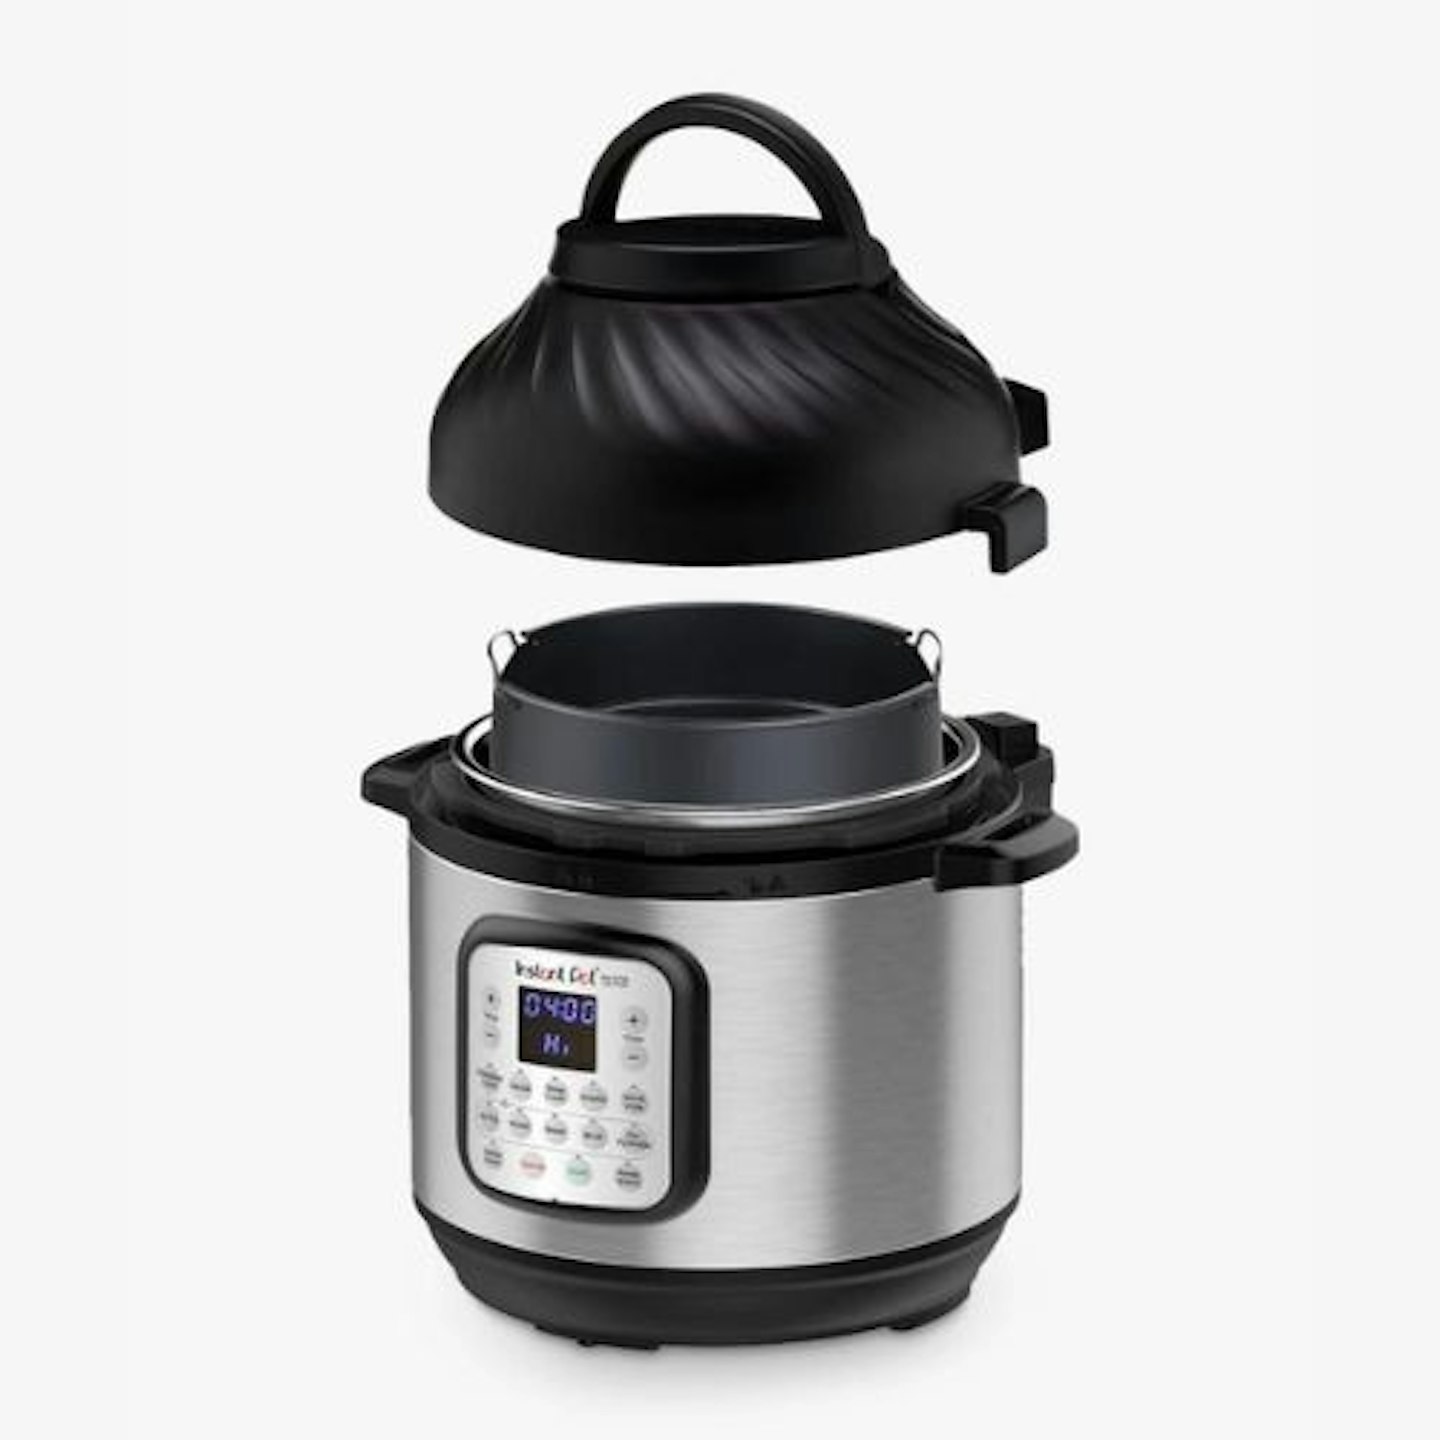 Instant Duo Crisp 8 11-in-1 Multi-Cooker And Air Fryer, 7.6L, Stainless Steel